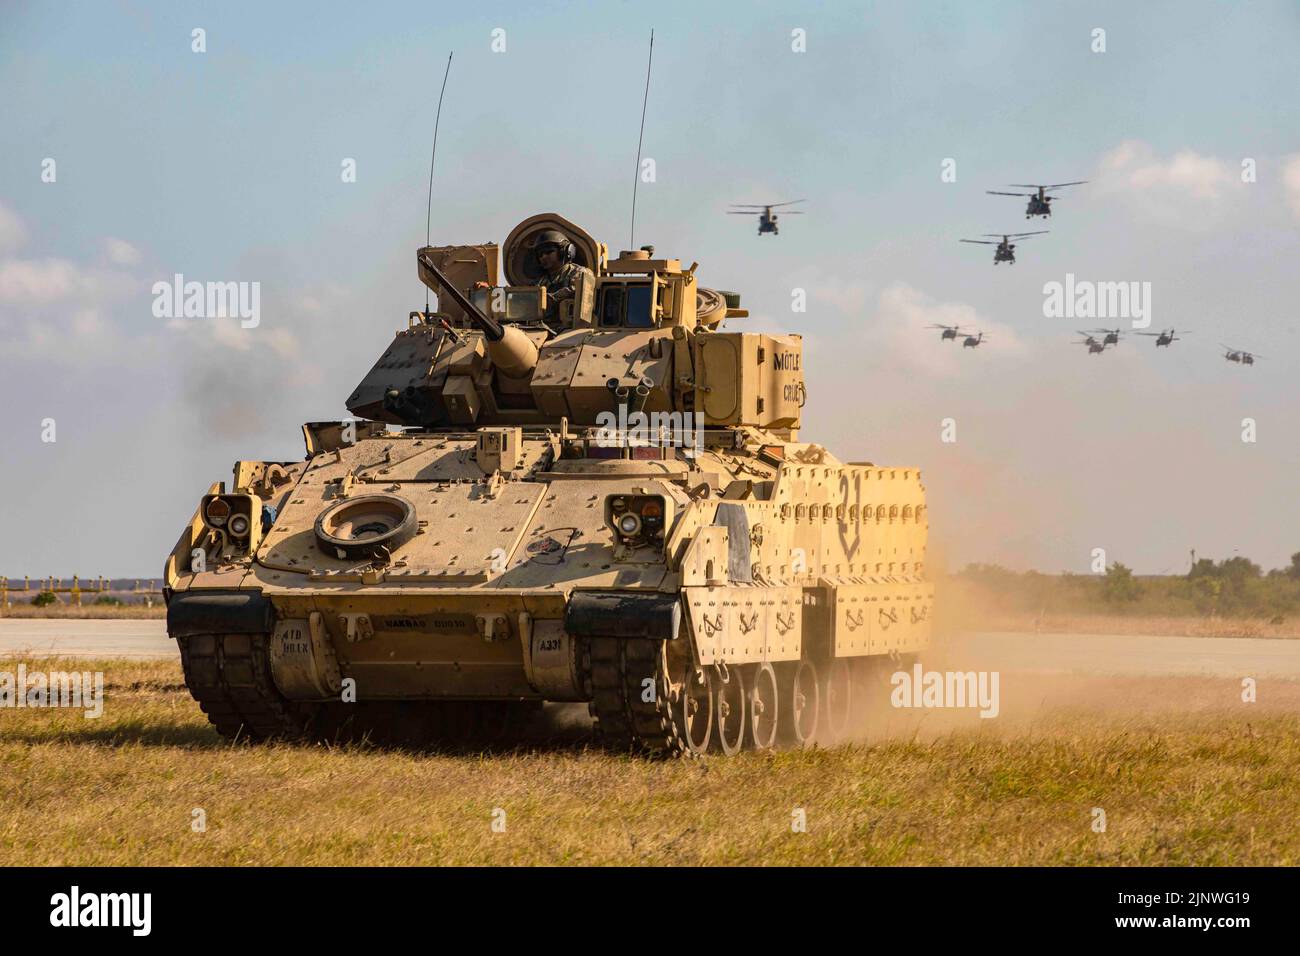 Mihail Kogalniceanu, Romania. 30th July, 2022. A Bradley Fighting Vehicle assigned to the 1st Battalion, 8th Infantry Regiment FIGHTING EAGLES 3rd Armored Brigade Combat Team, 4th Infantry Division moves into position as UH-60 Blackhawks assigned to the 3rd Battalion, 227th Aviation Regiment, 1st Air Cavalry Brigade, 1st Air Cavalry Division, conduct a fly over during an Air Assault demonstration on July 30, 2022, at Mihail Kogalniceanu, Romania. 101st units will support V Corps mission to reinforce NATO's eastern flank and engage in multinational exercises with partners across the European Stock Photo